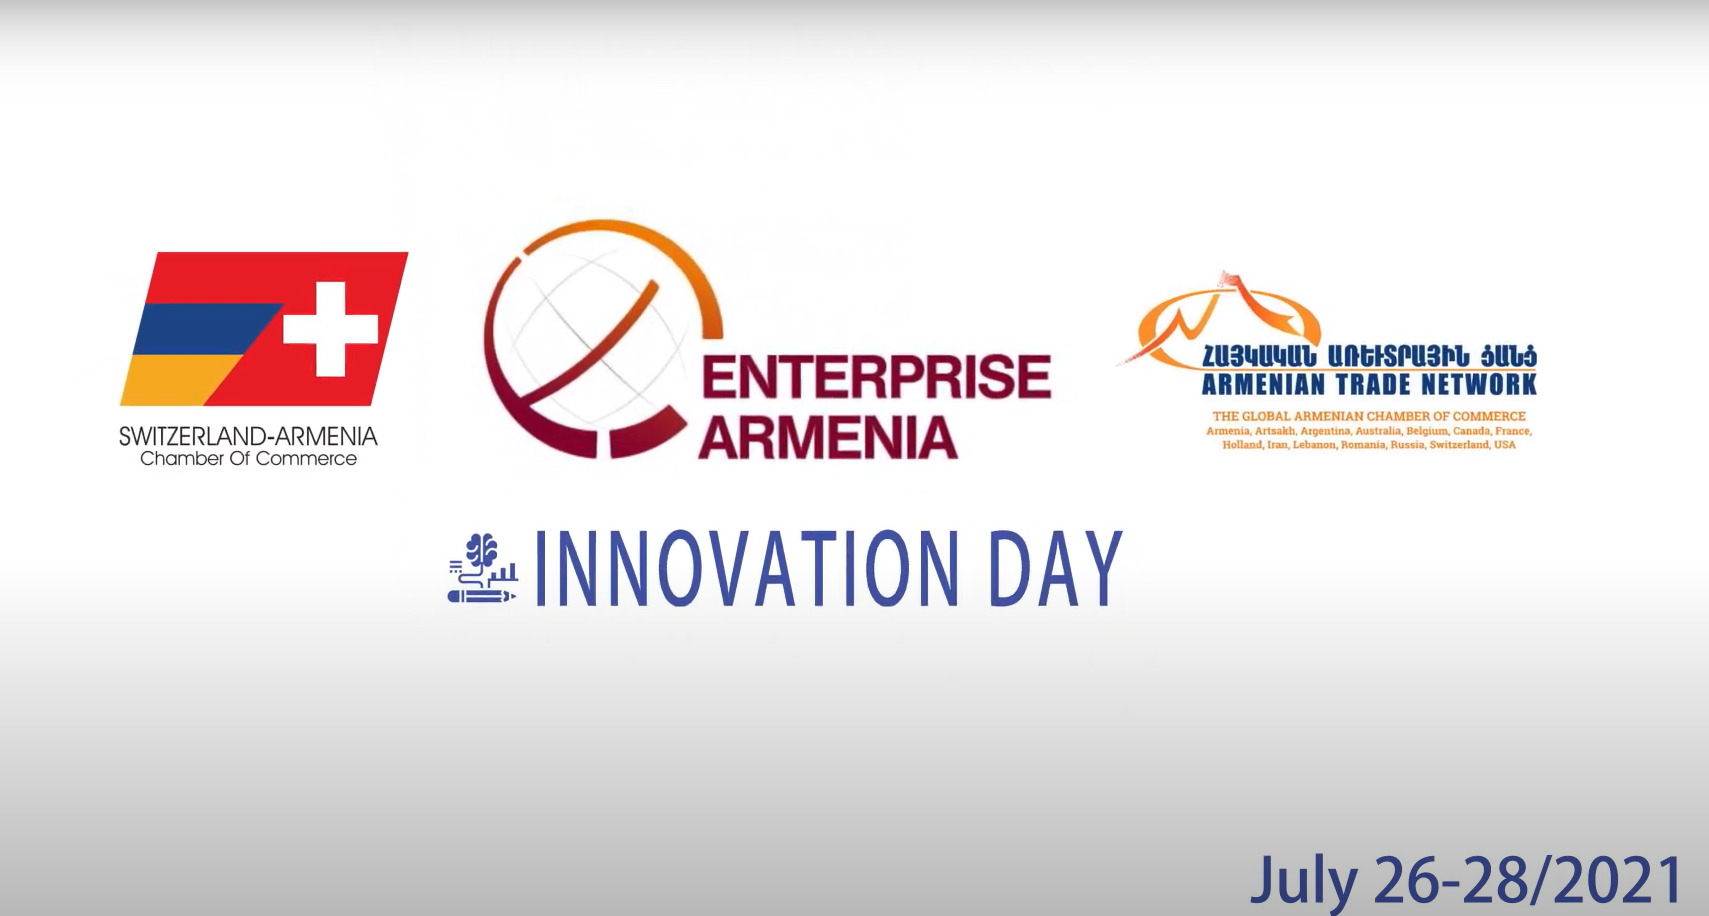 MIG Trans participates in Innovation Day